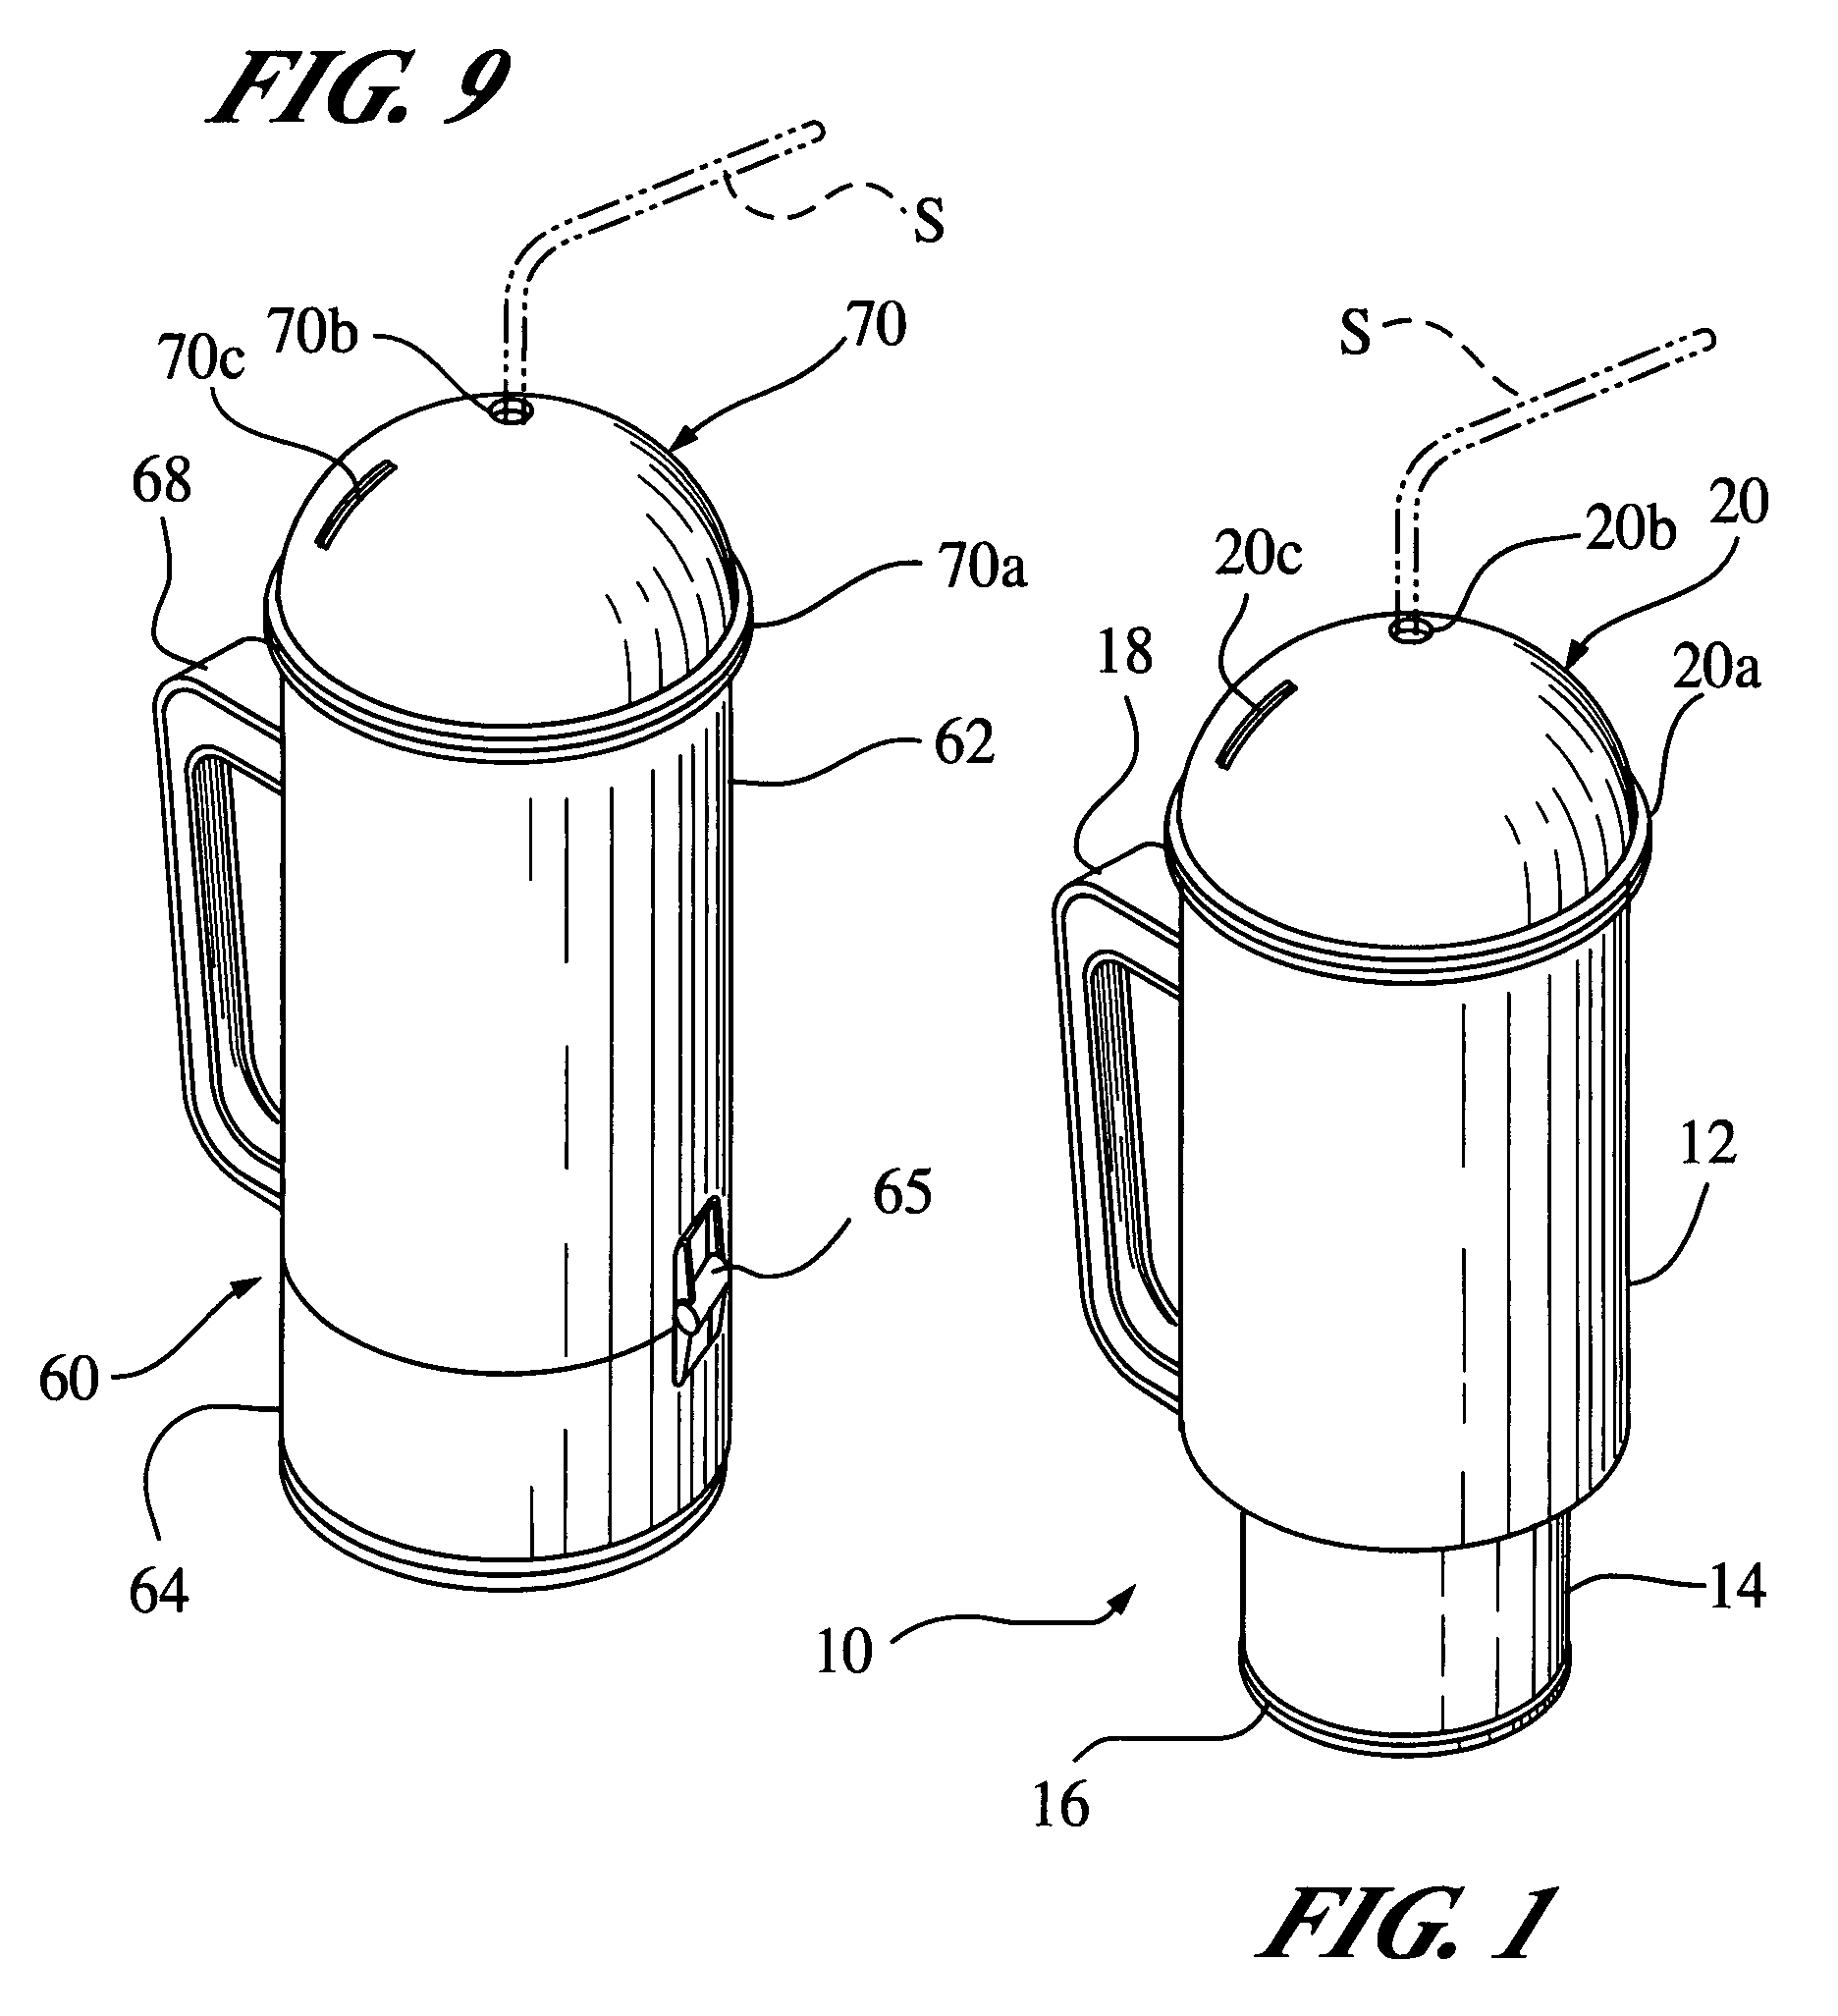 Compartmentalized beverage container device